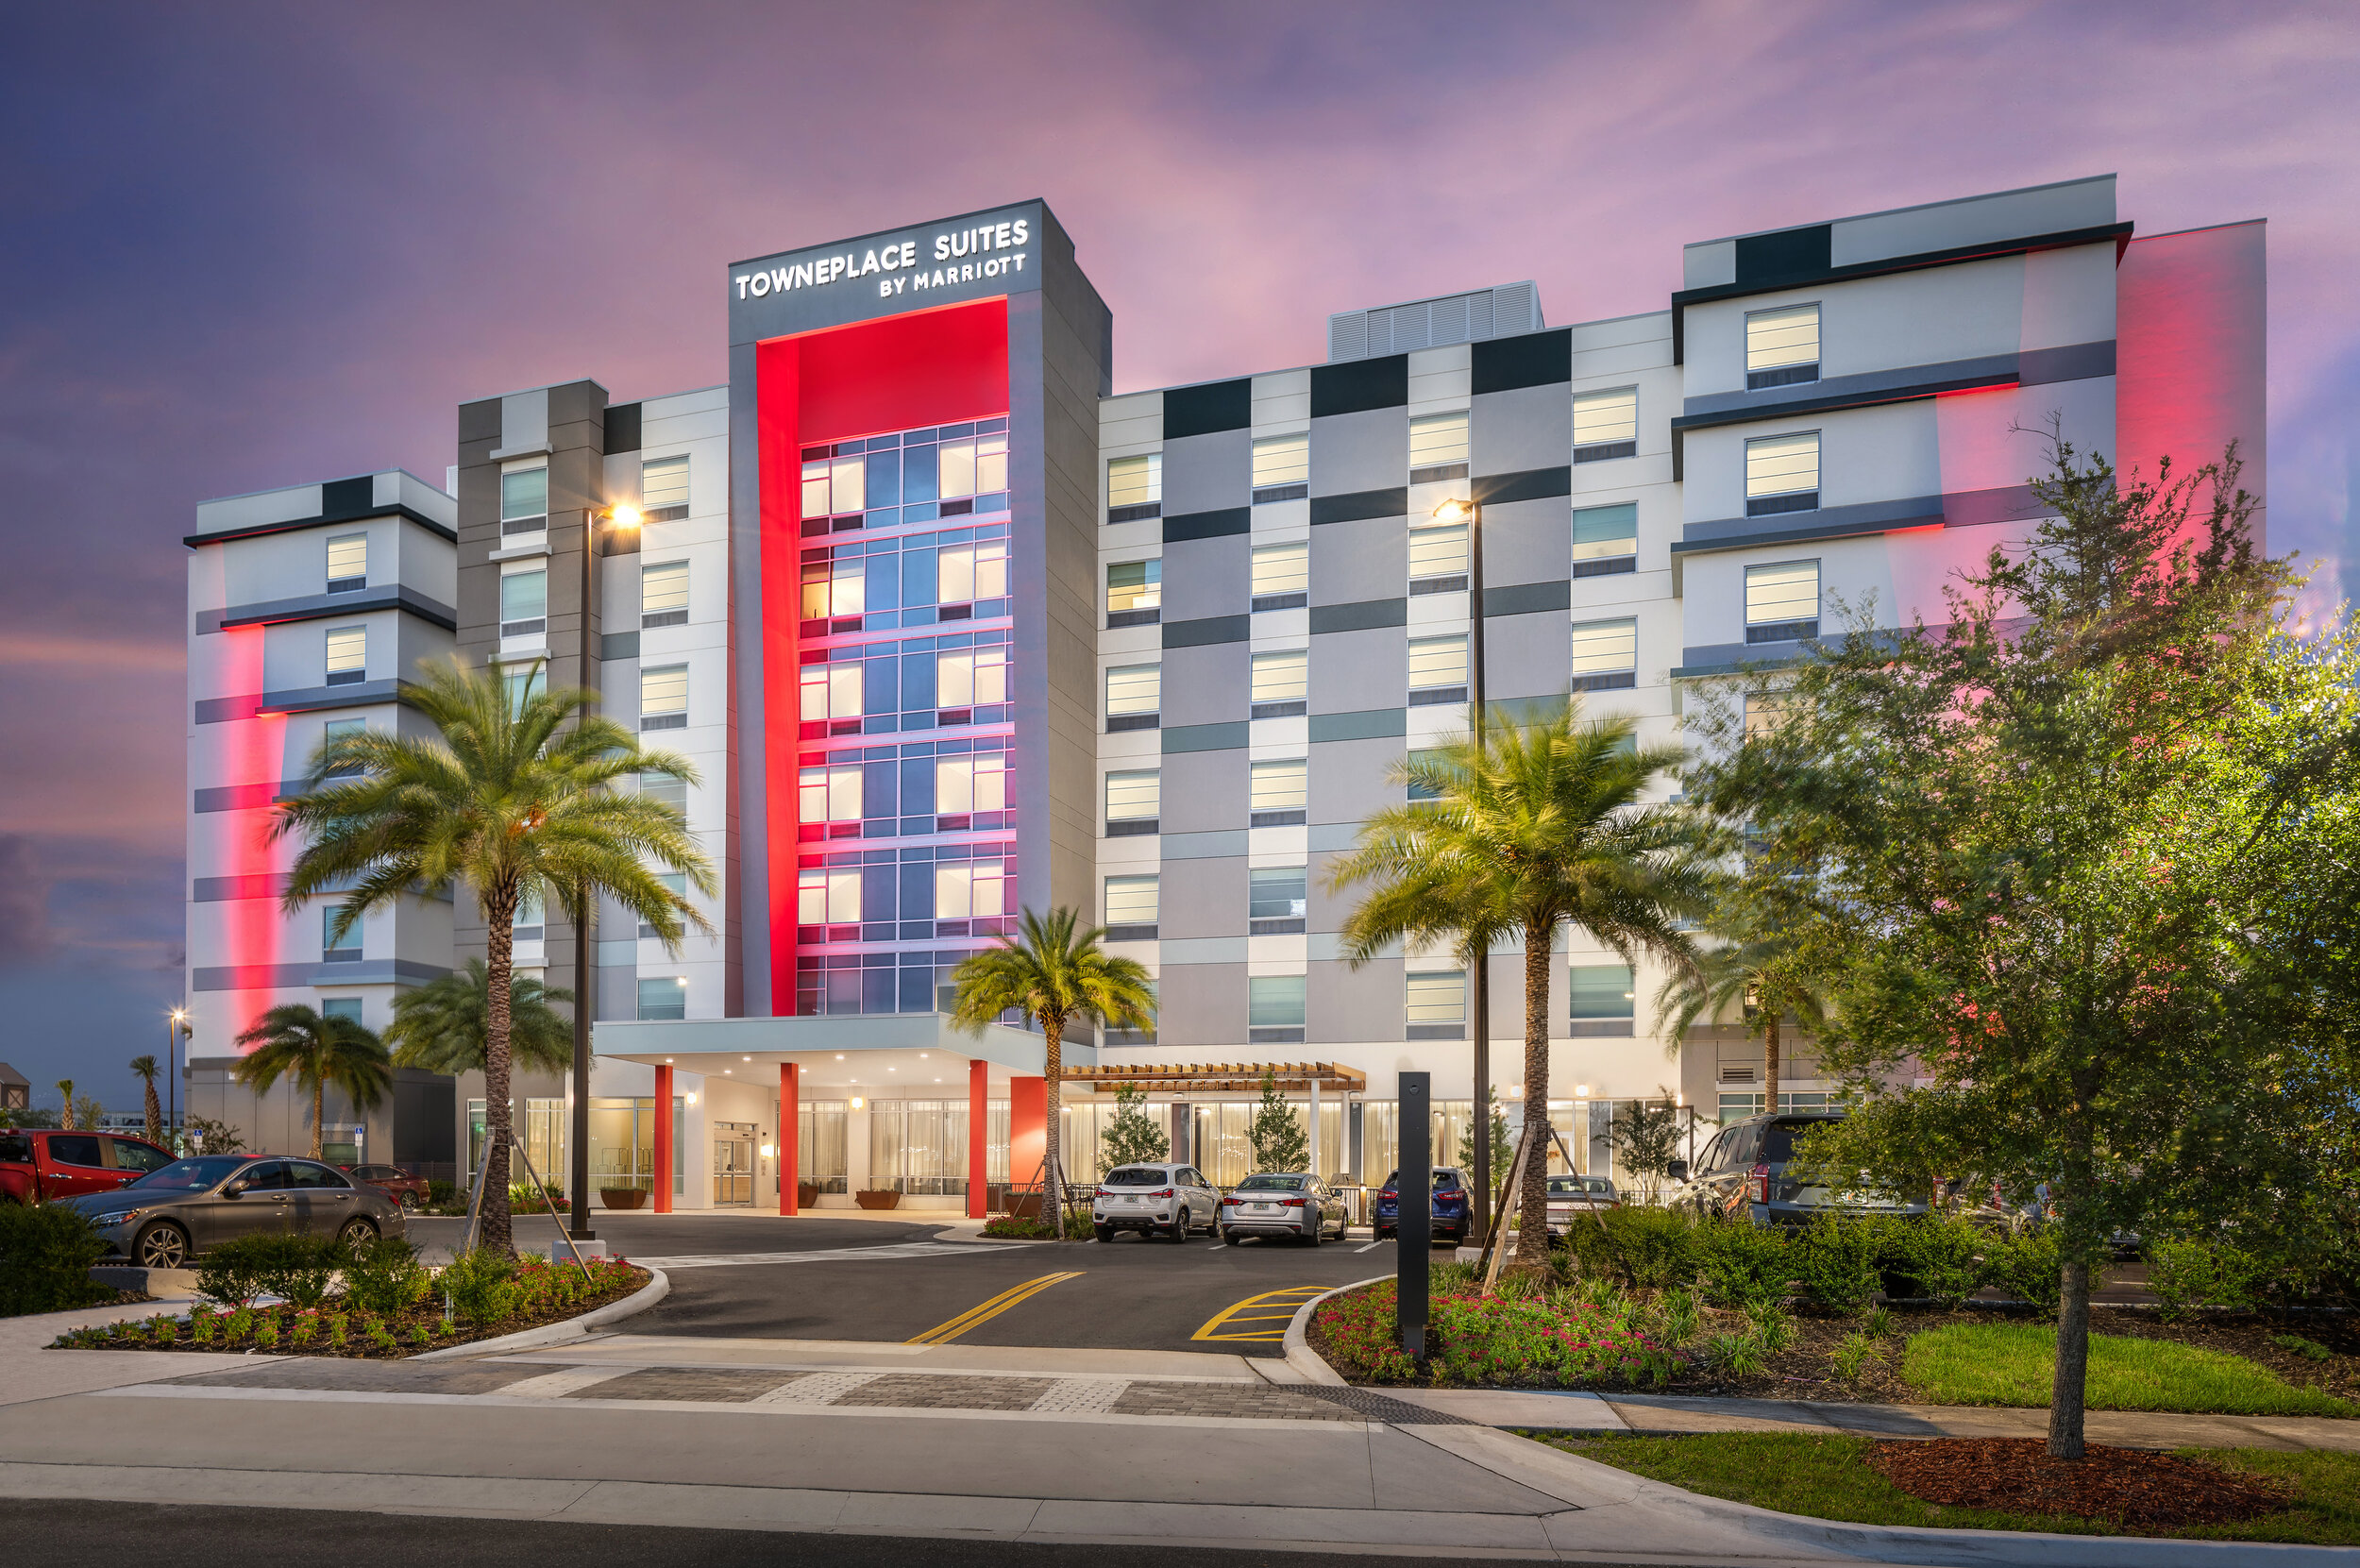 Towneplace Suites_Orlando Universal_Front Twilight_3HGroup_by 161 Photography.jpg